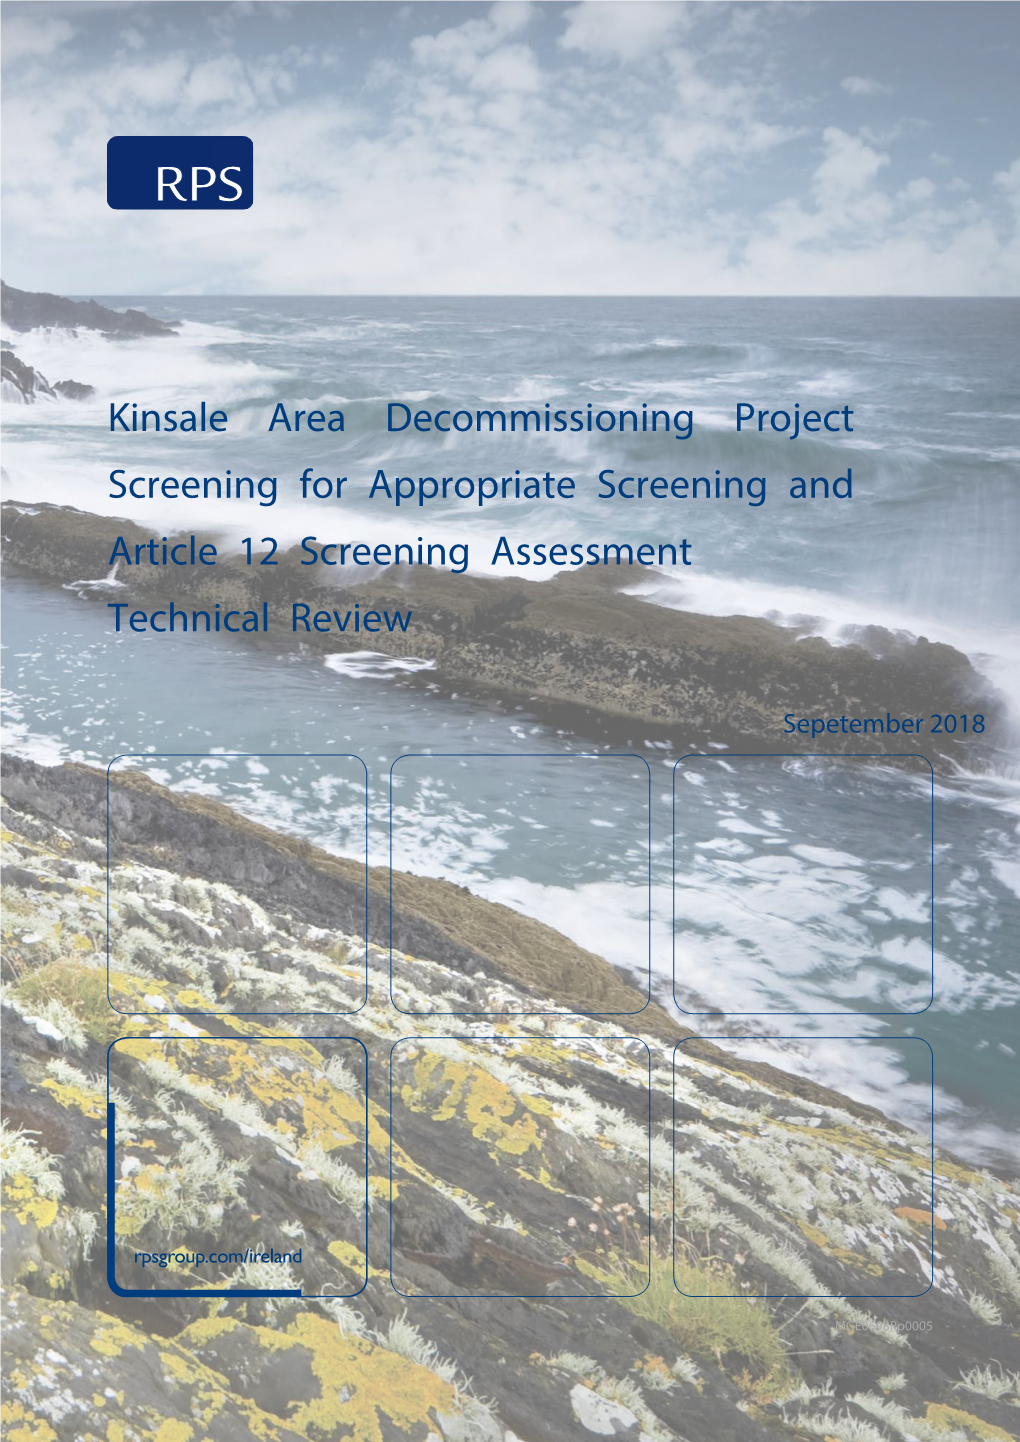 Kinsale Area Decommissioning Project Screening for Appropriate Screening and Article 12 Screening Assessment Technical Review